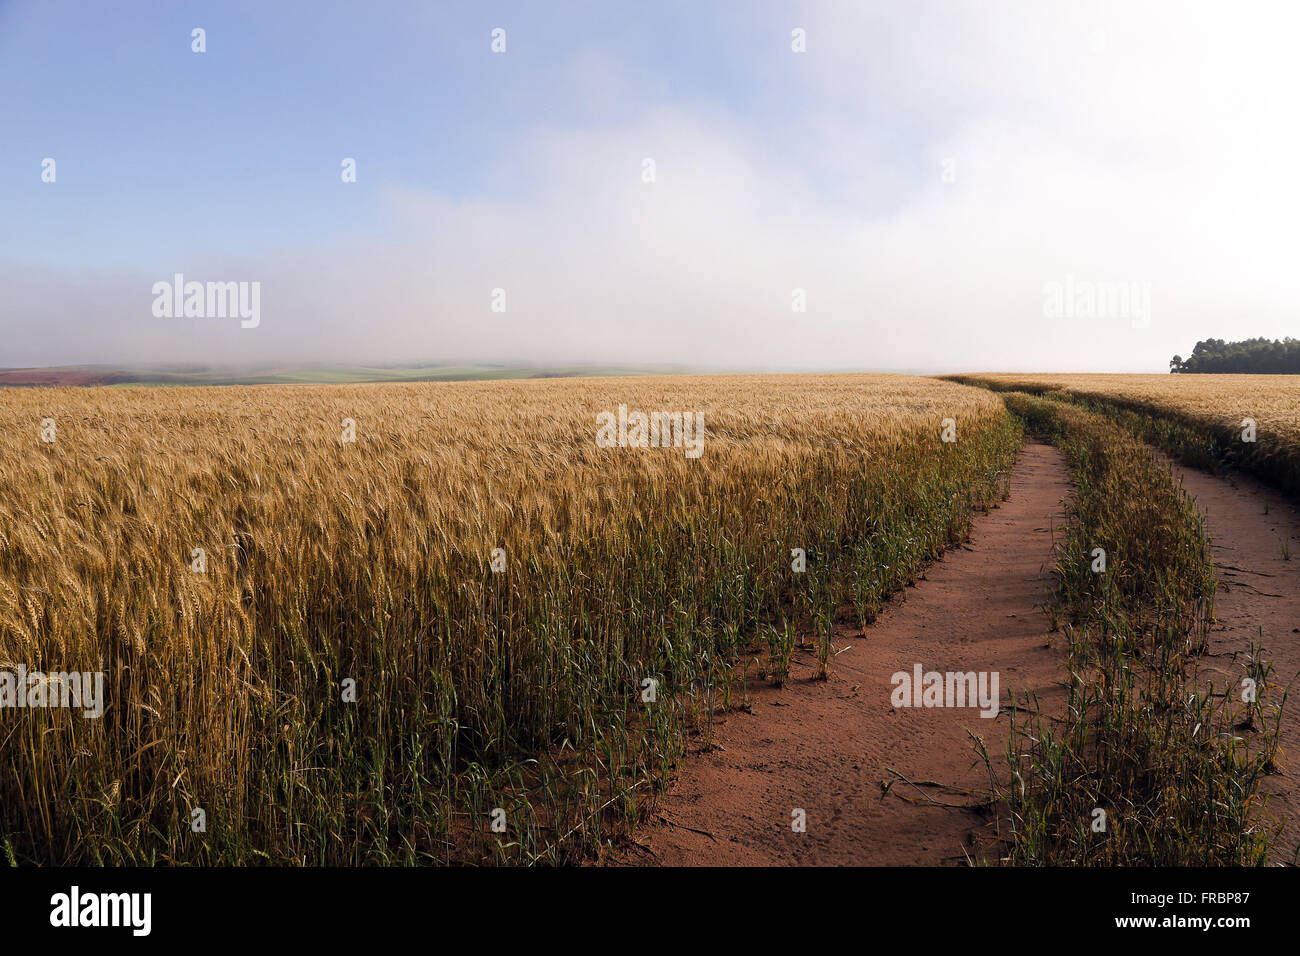 Dirt road through the wheat plantation in the countryside Stock Photo